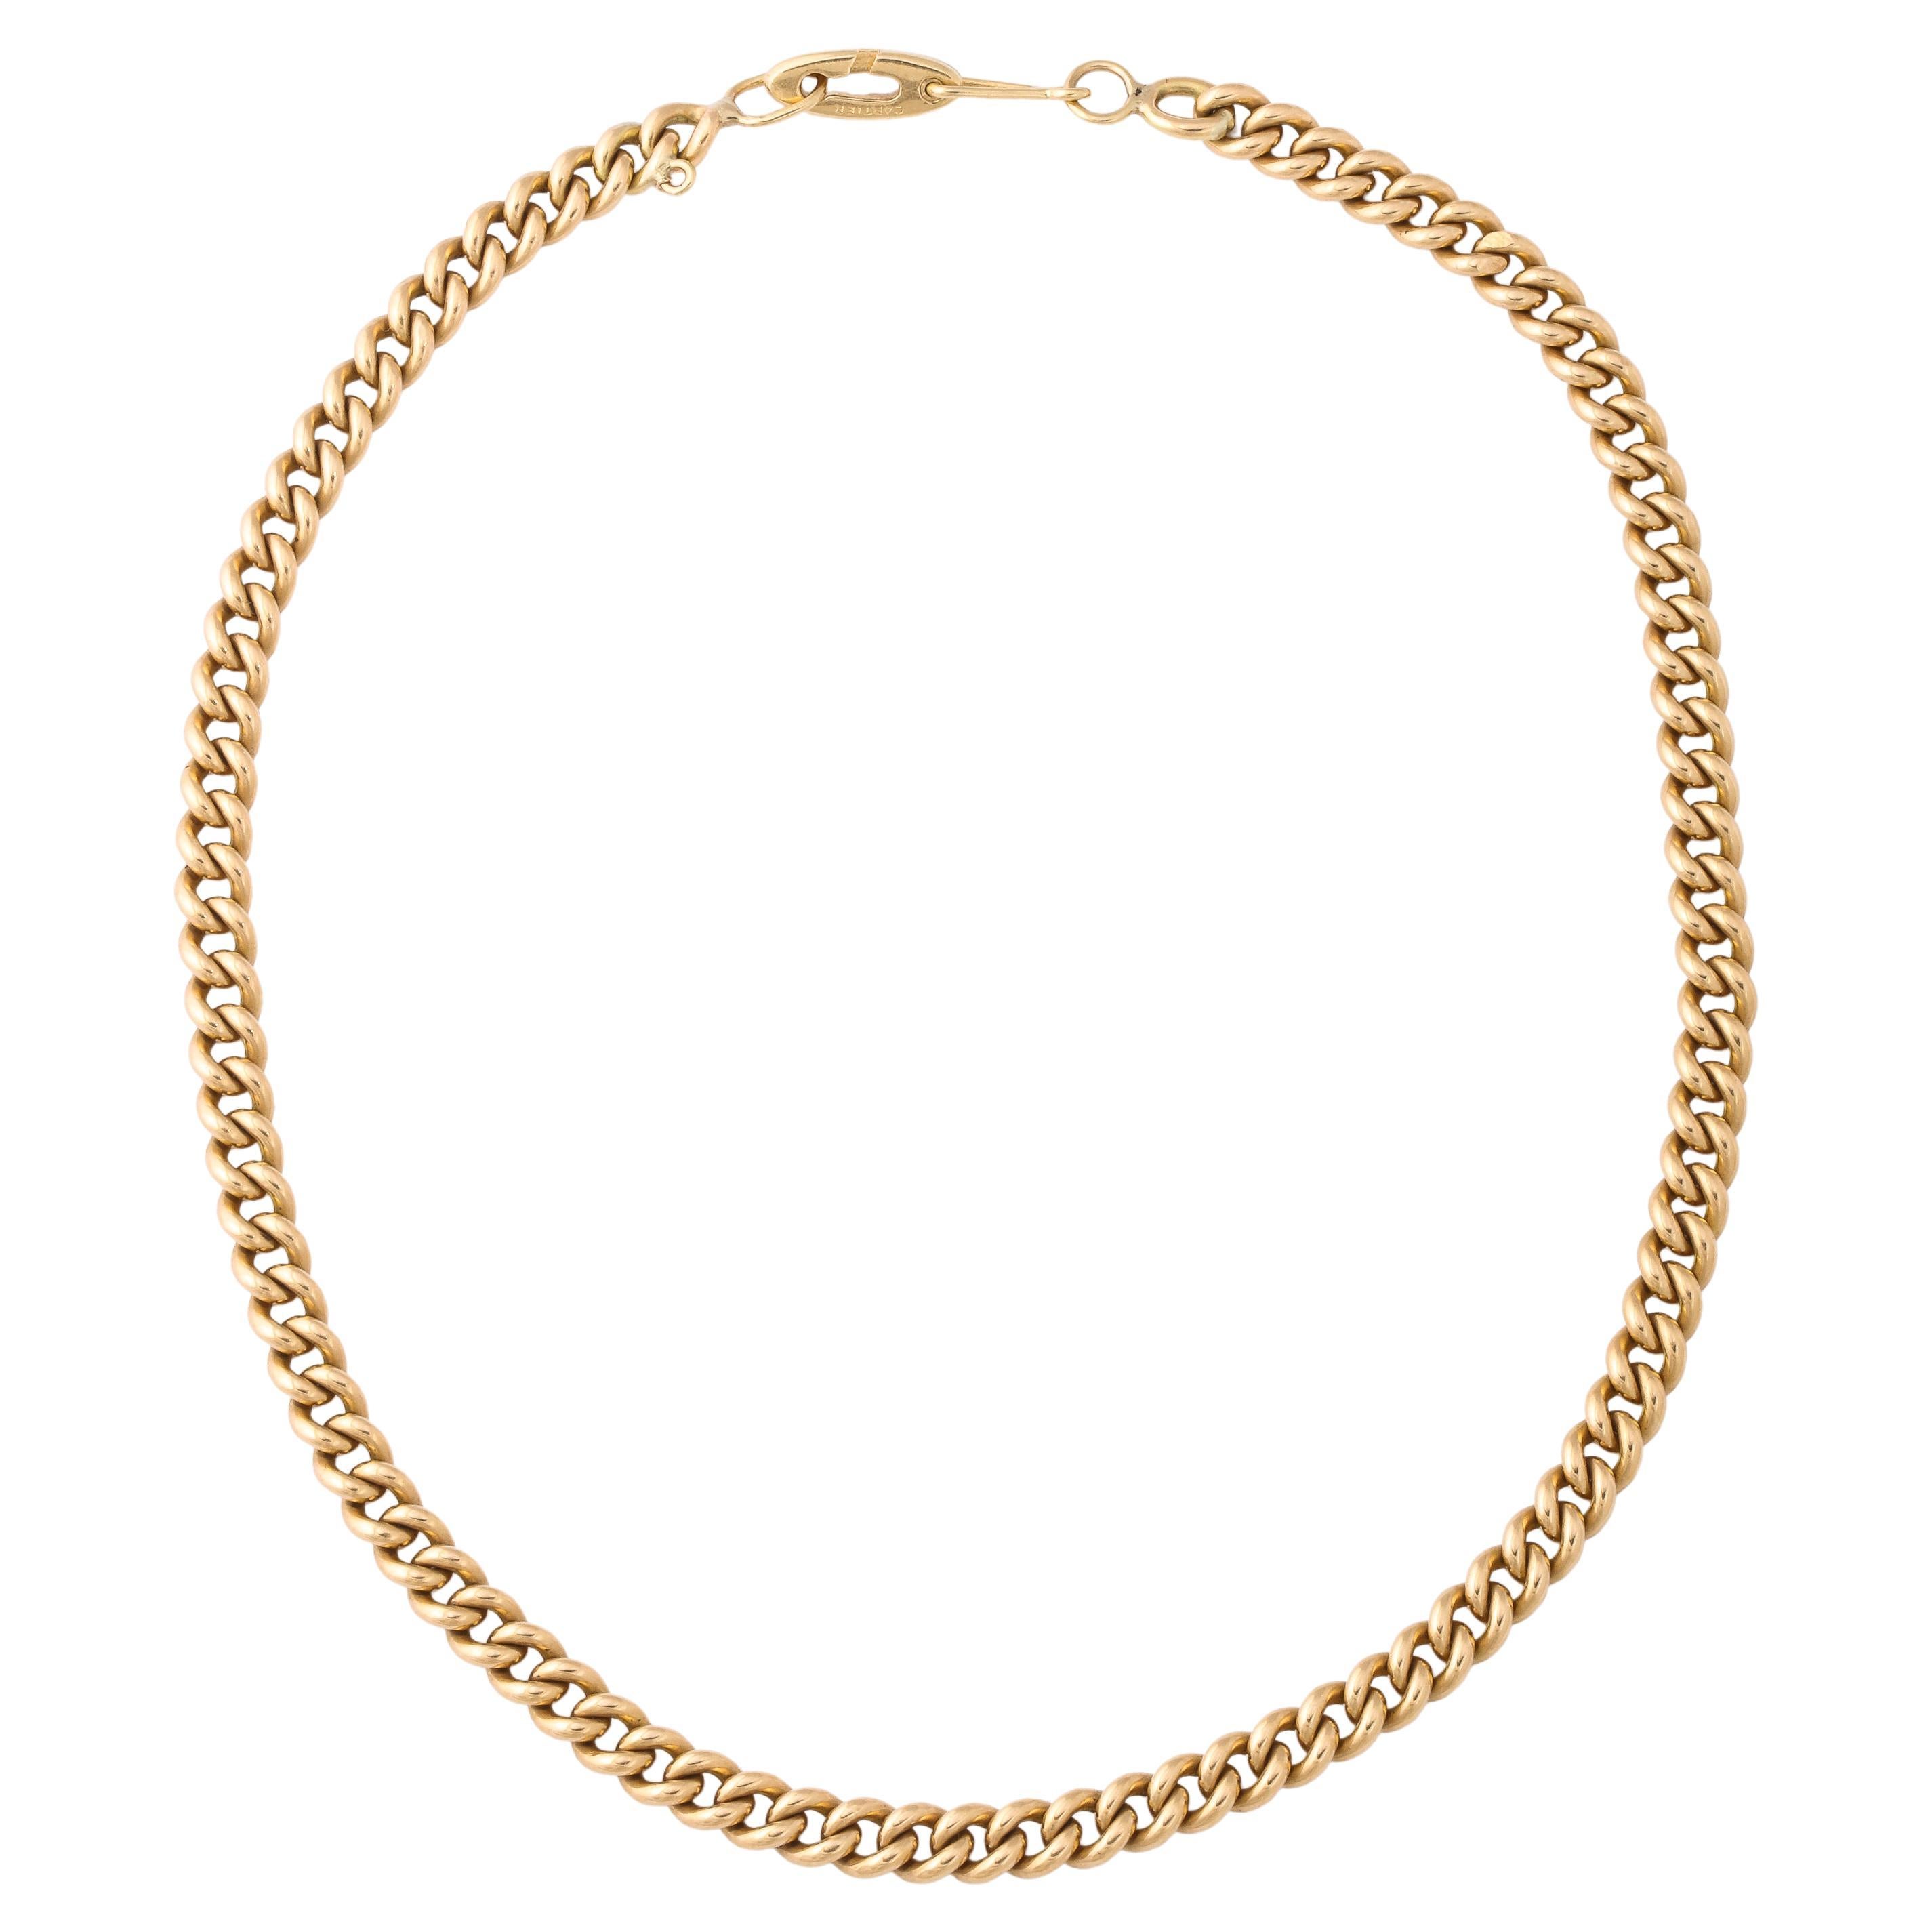 Cartier 14K Gold Curb Link Chain Necklace